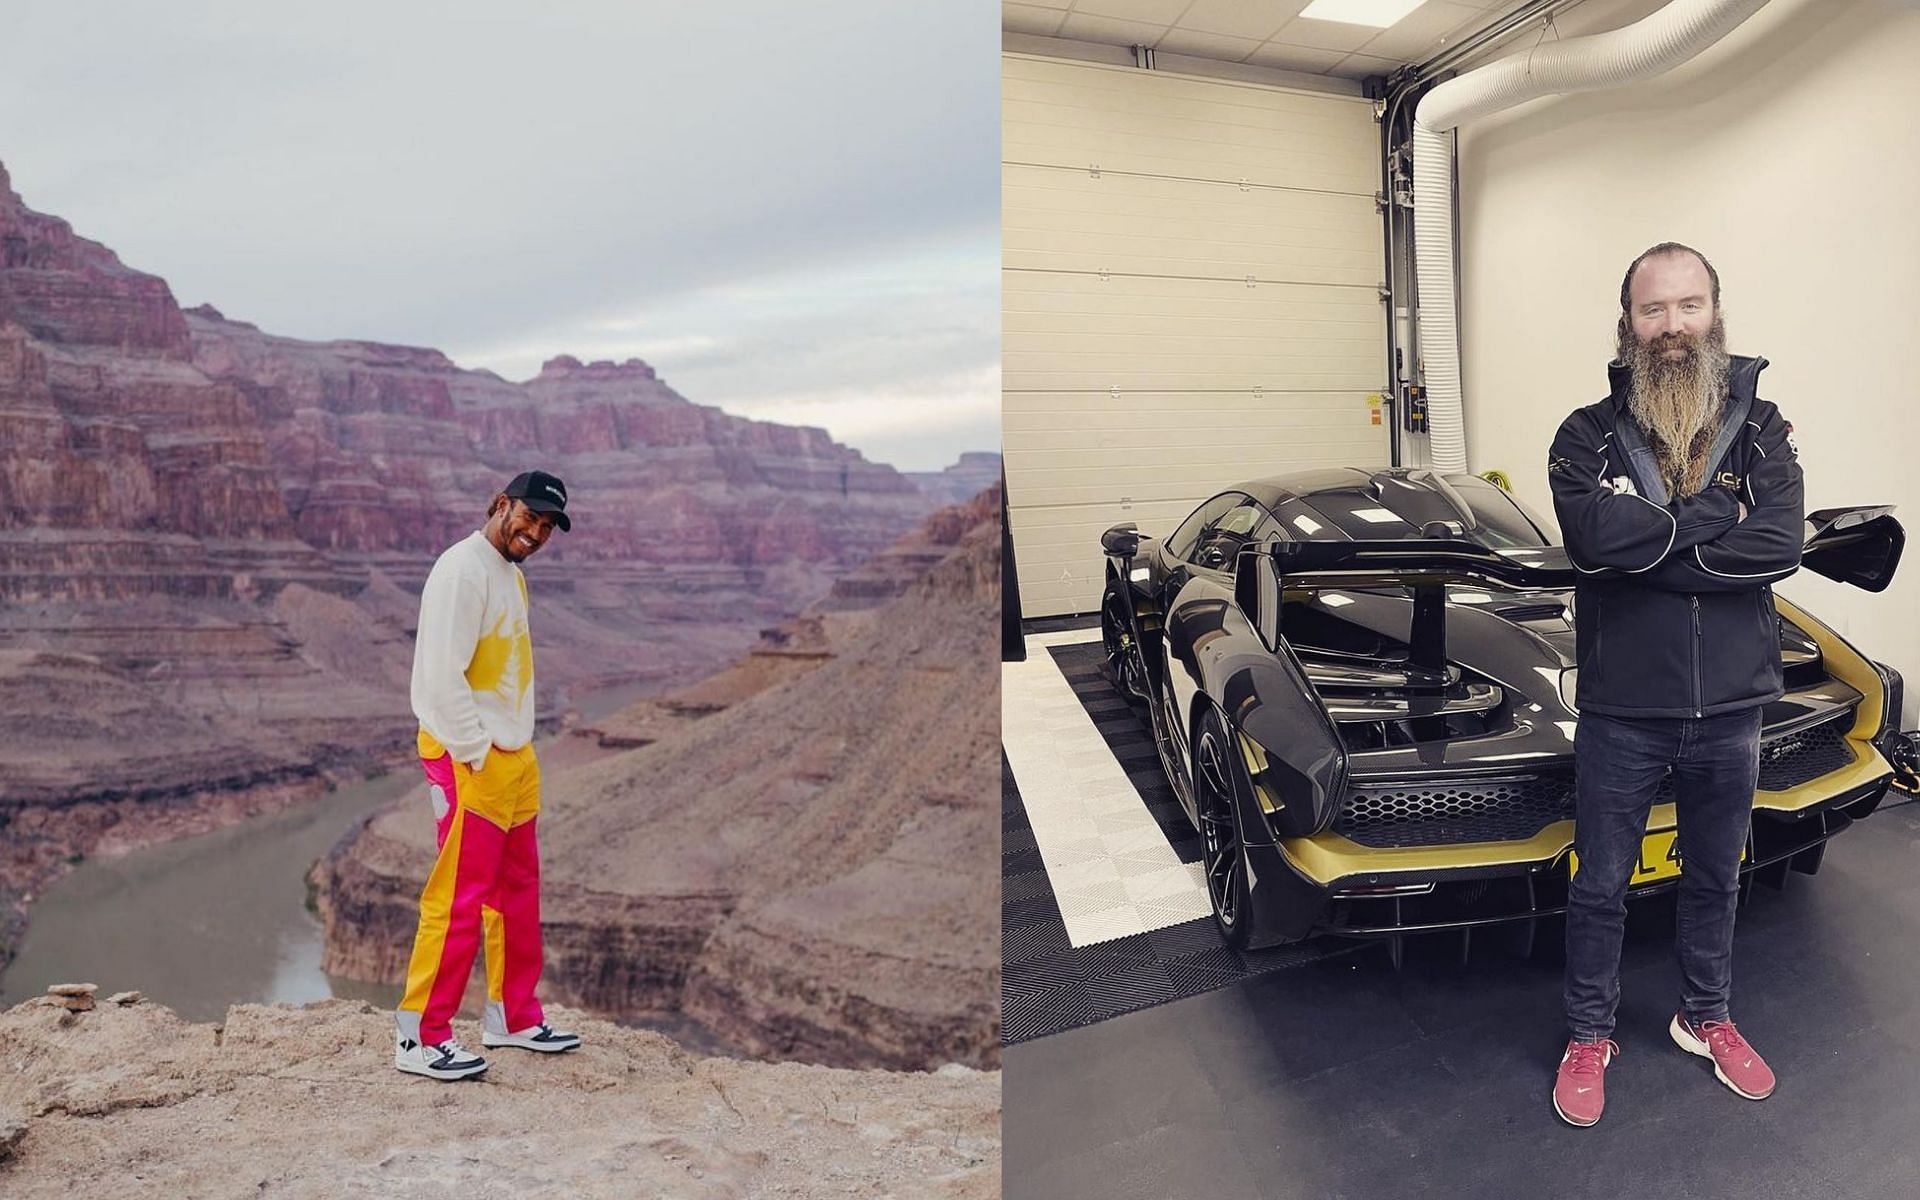 Lewis Hamilton (left) and William Storey (right). Both images taken from their respective Instagram accounts